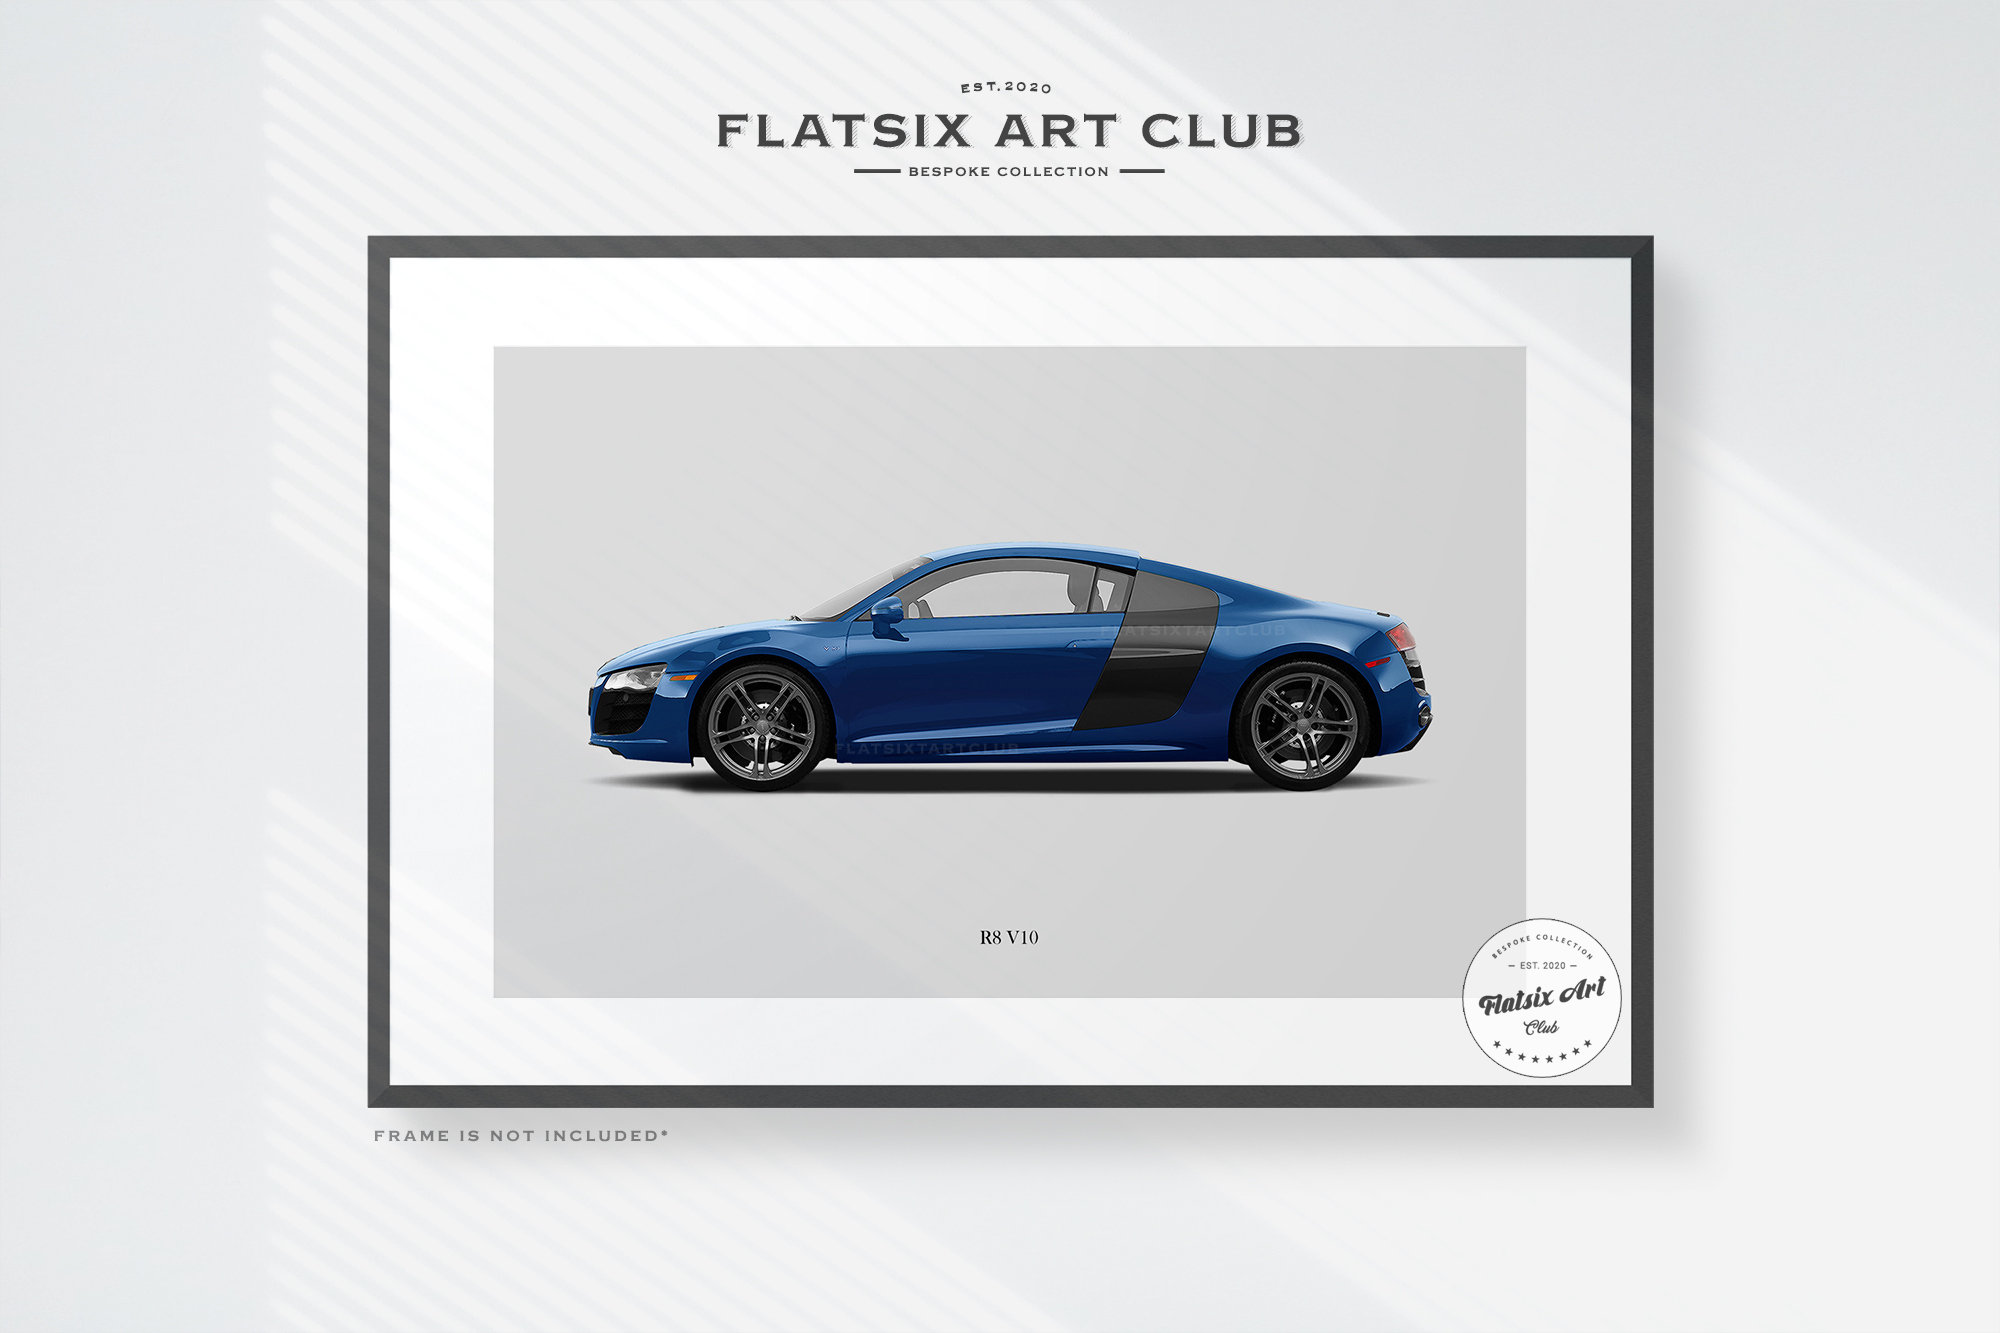 Supercar Poster Audi R8 Canvas Art Poster And Wall Art Picture Print Modern  Family Bedroom Decor Posters 20x30inch(50x75cm) : : Everything  Else